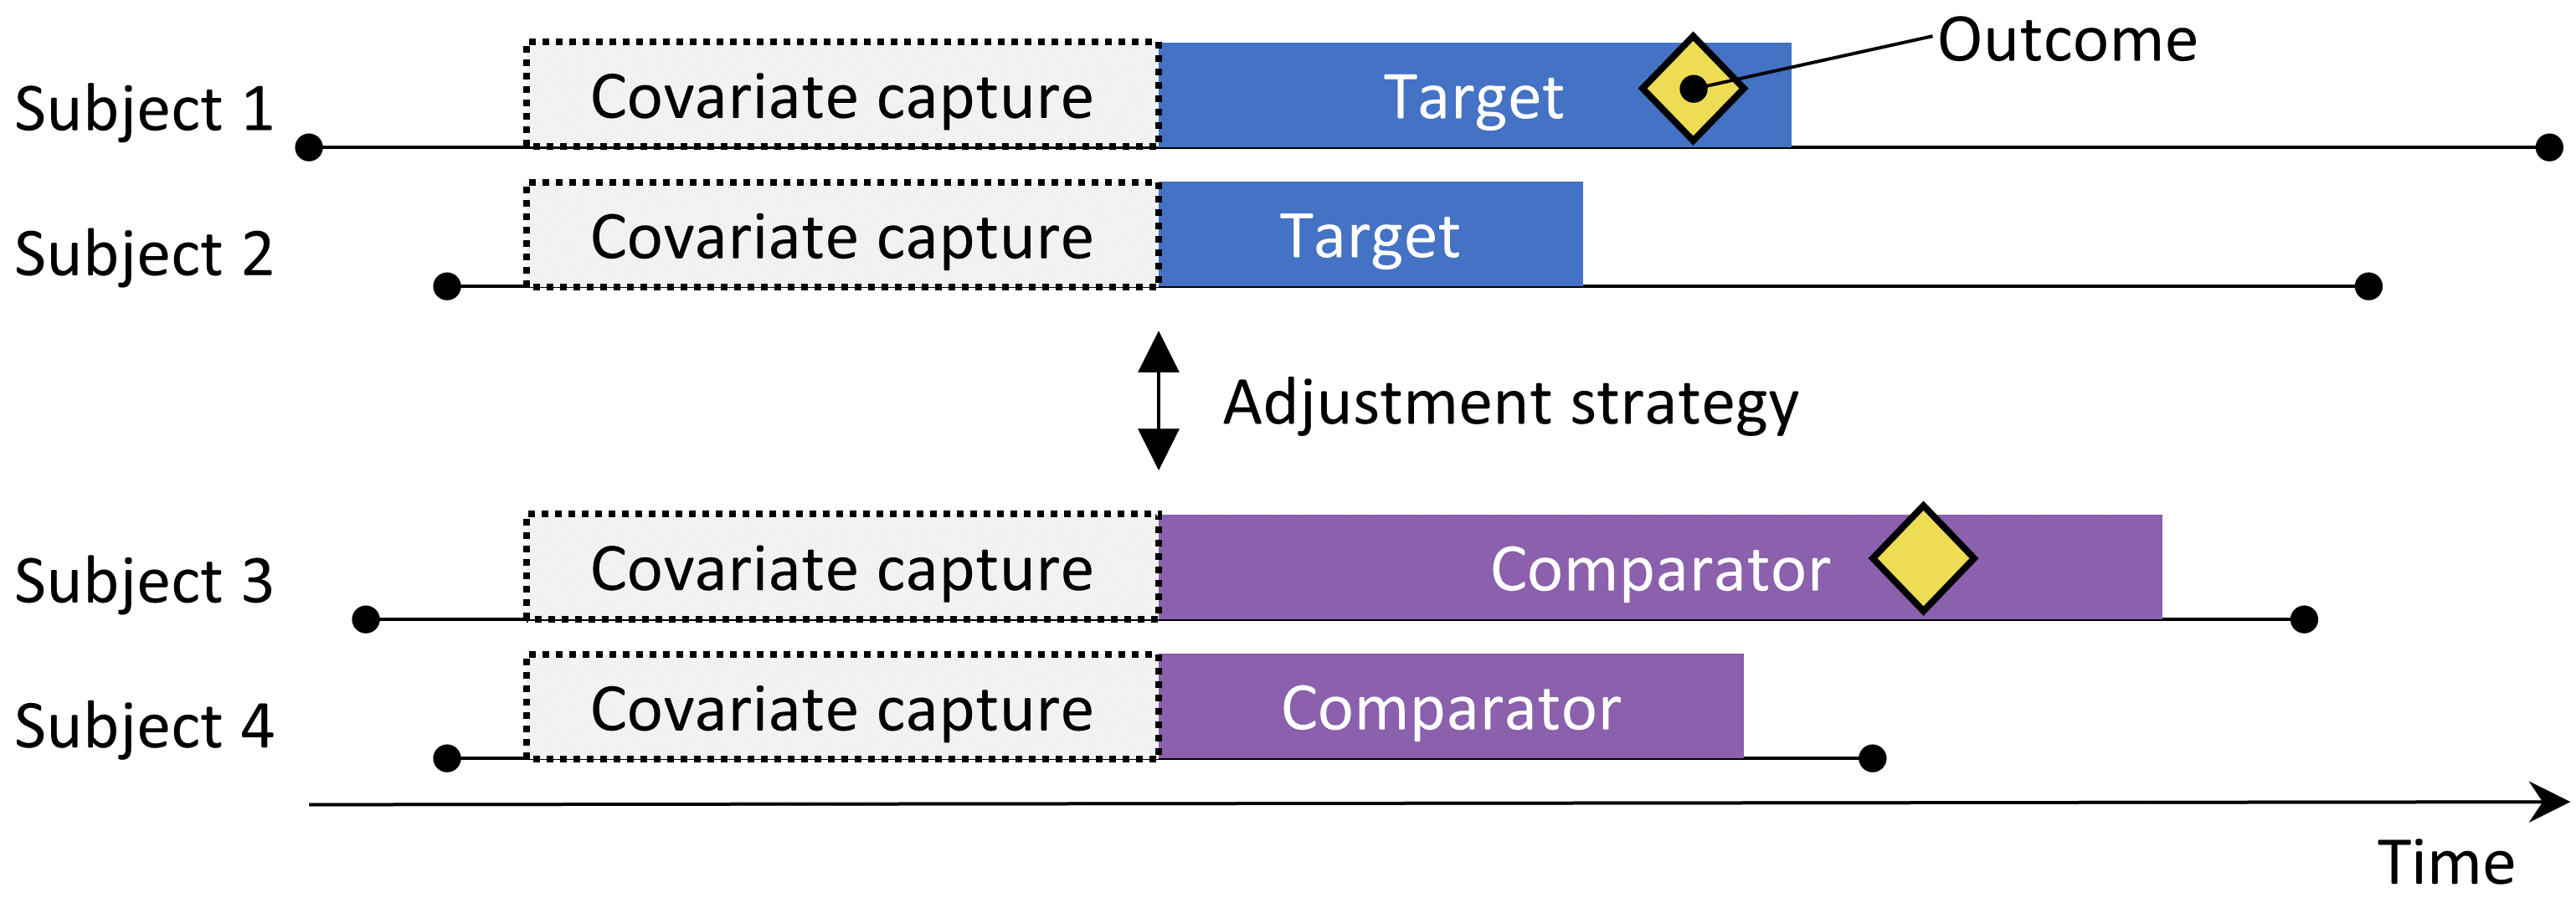 The new-user cohort design. Subjects observed to initiate the target treatment are compared to those initiating the comparator treatment. To adjust for differences between the two treatment groups several adjustment strategies can be used, such as stratification, matching, or weighting by the propensity score, or by adding baseline characteristics to the outcome model. The characteristics included in the propensity model or outcome model are captured prior to treatment initiation.